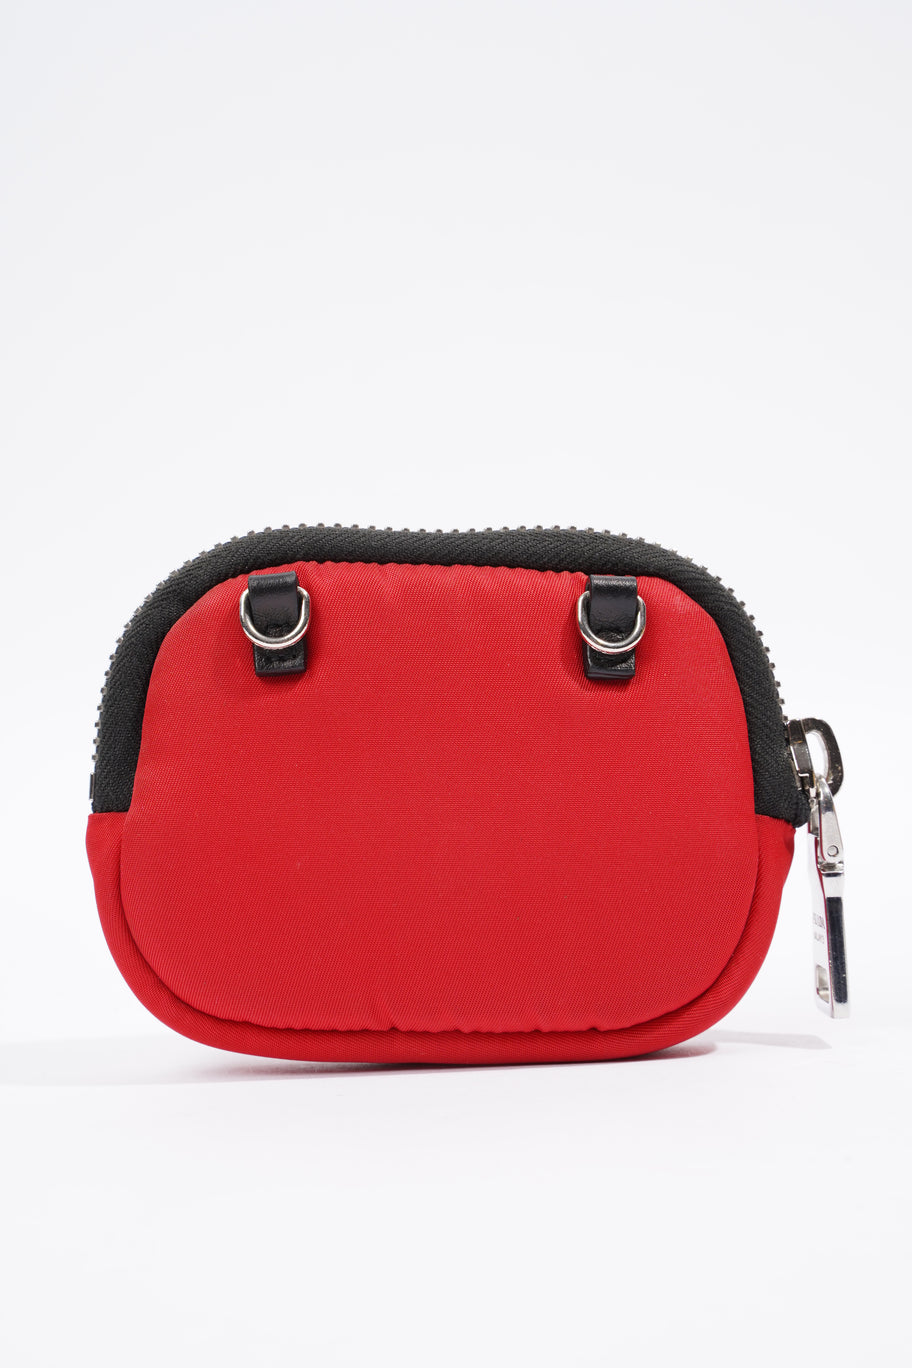 Pouch With Strap Red Nylon Image 3